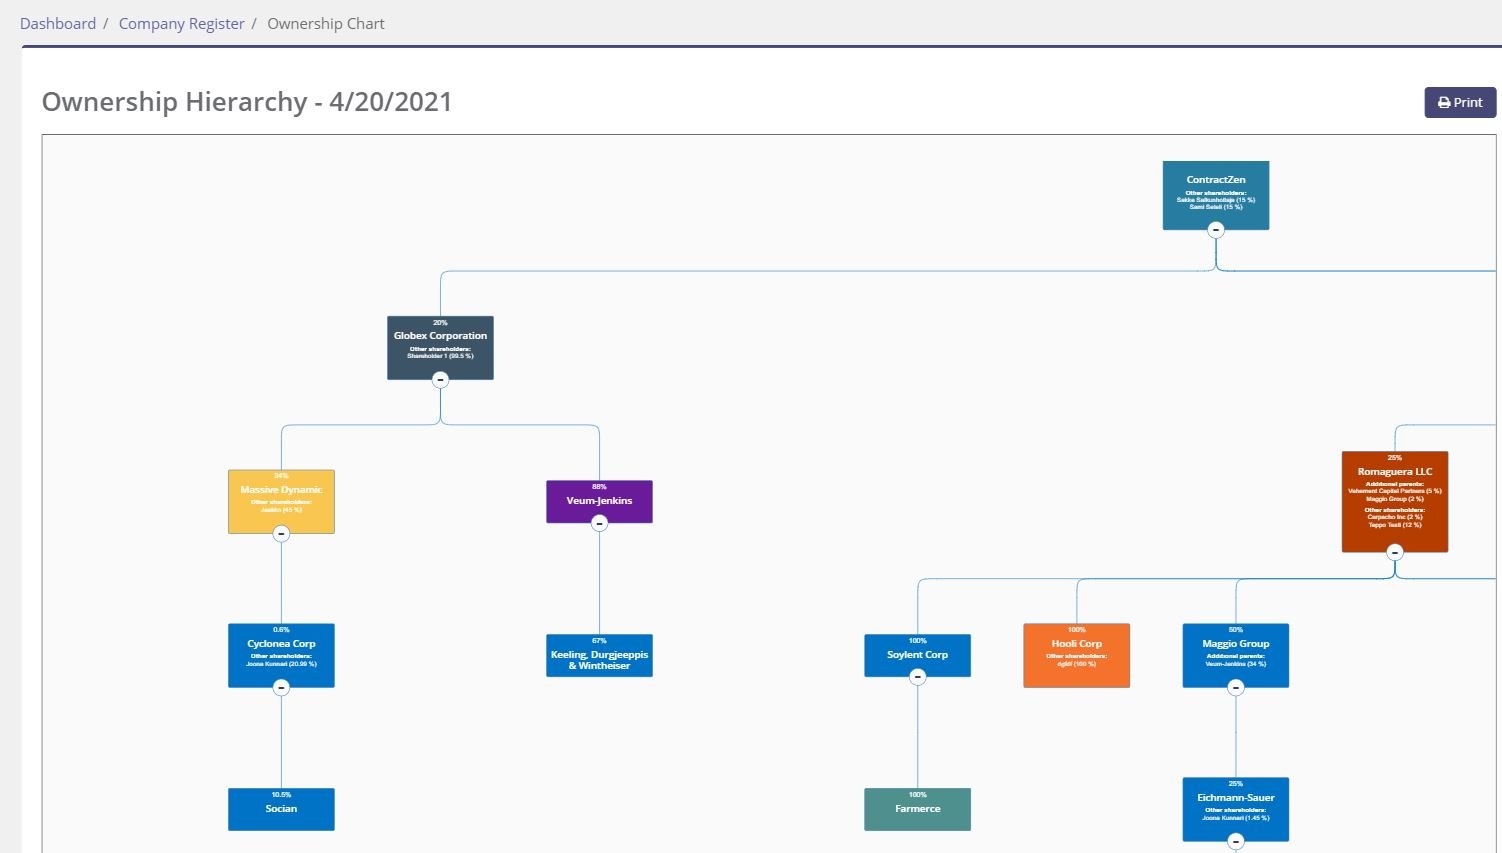 Ownership Chart Now Available in Company Register Tool